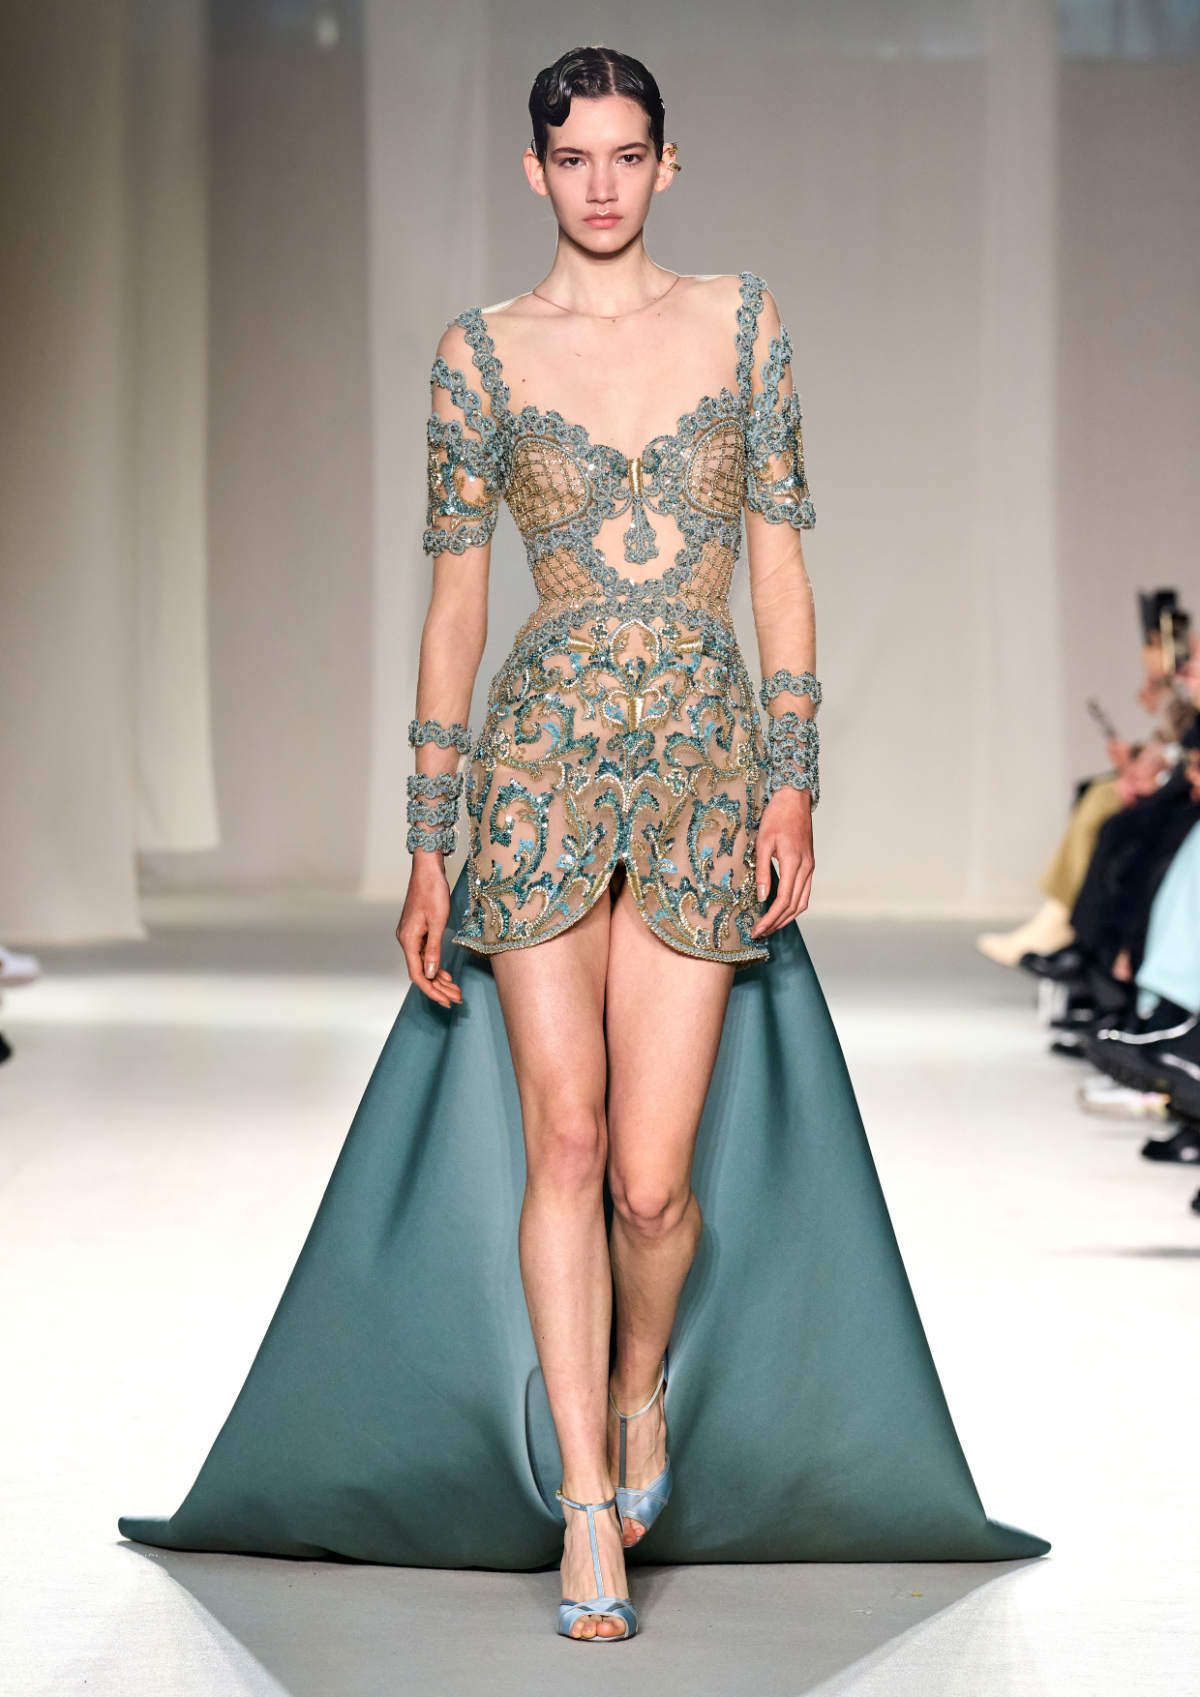 Elie Saab Presents His New Haute Couture Spring-Summer 2023 Collection: A Golden Down